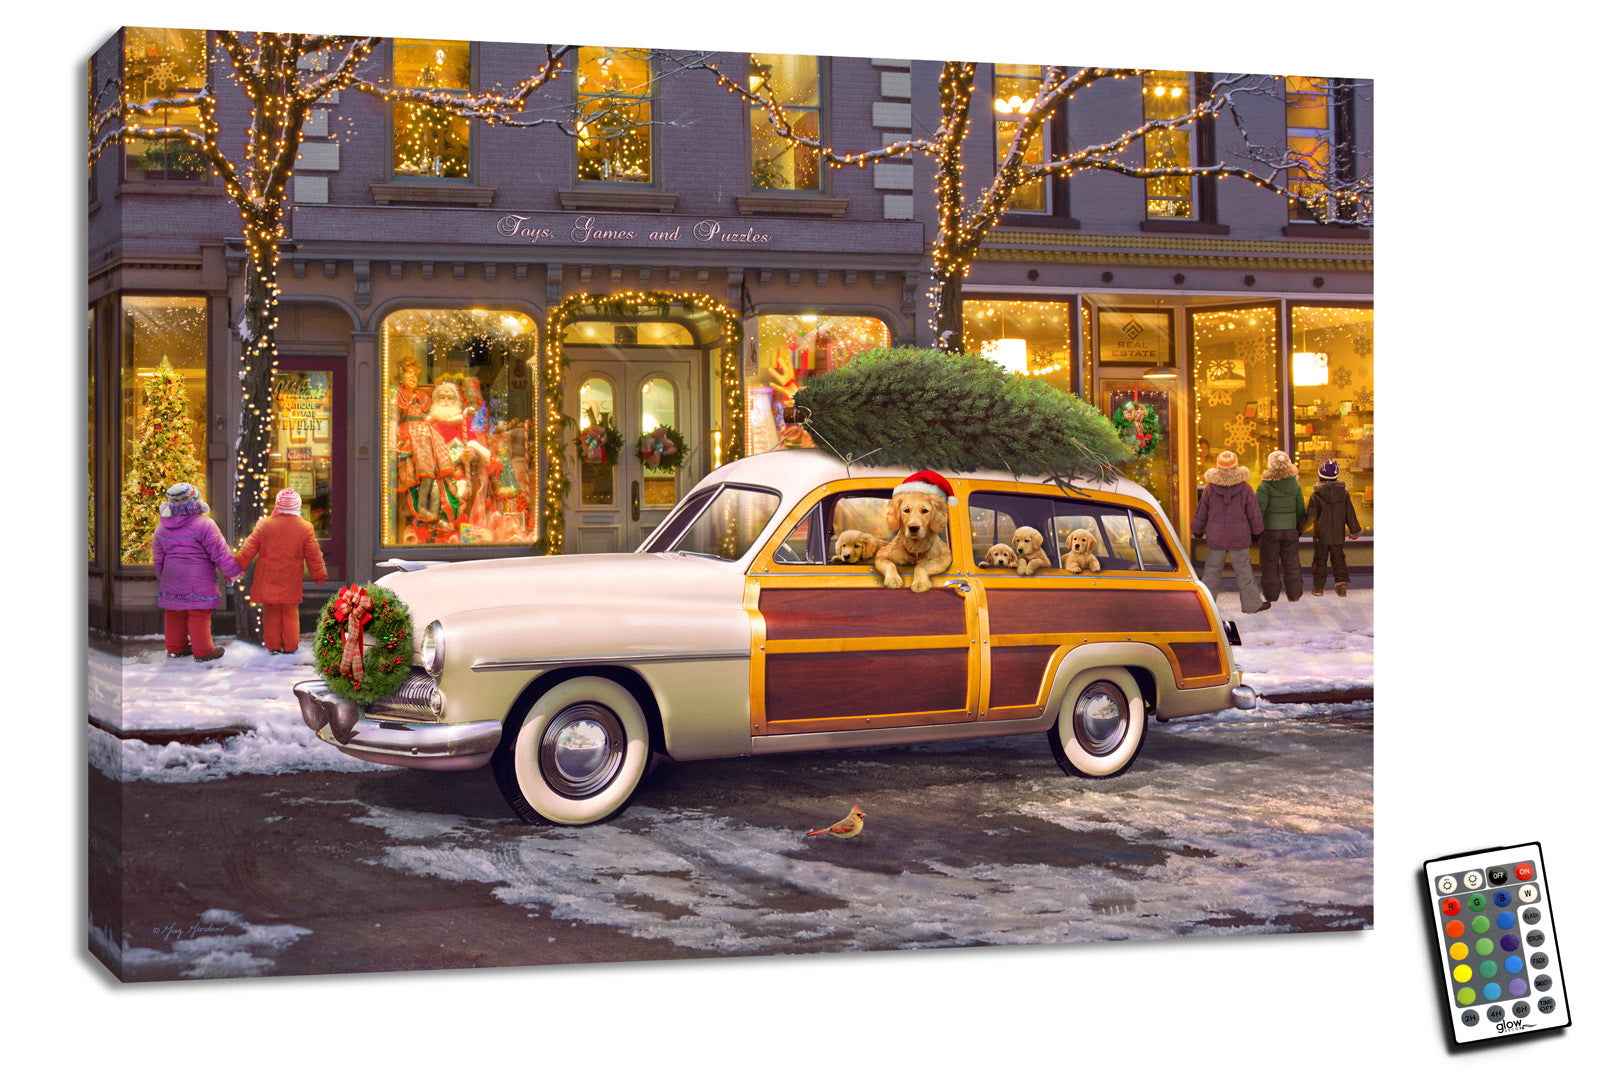 This charming piece features a vintage car with wooden paneling parked in front of a bustling shopping area. A playful golden retriever and its adorable puppies sitting in the car, with the retriever even donning a Santa's hat for the occasion.